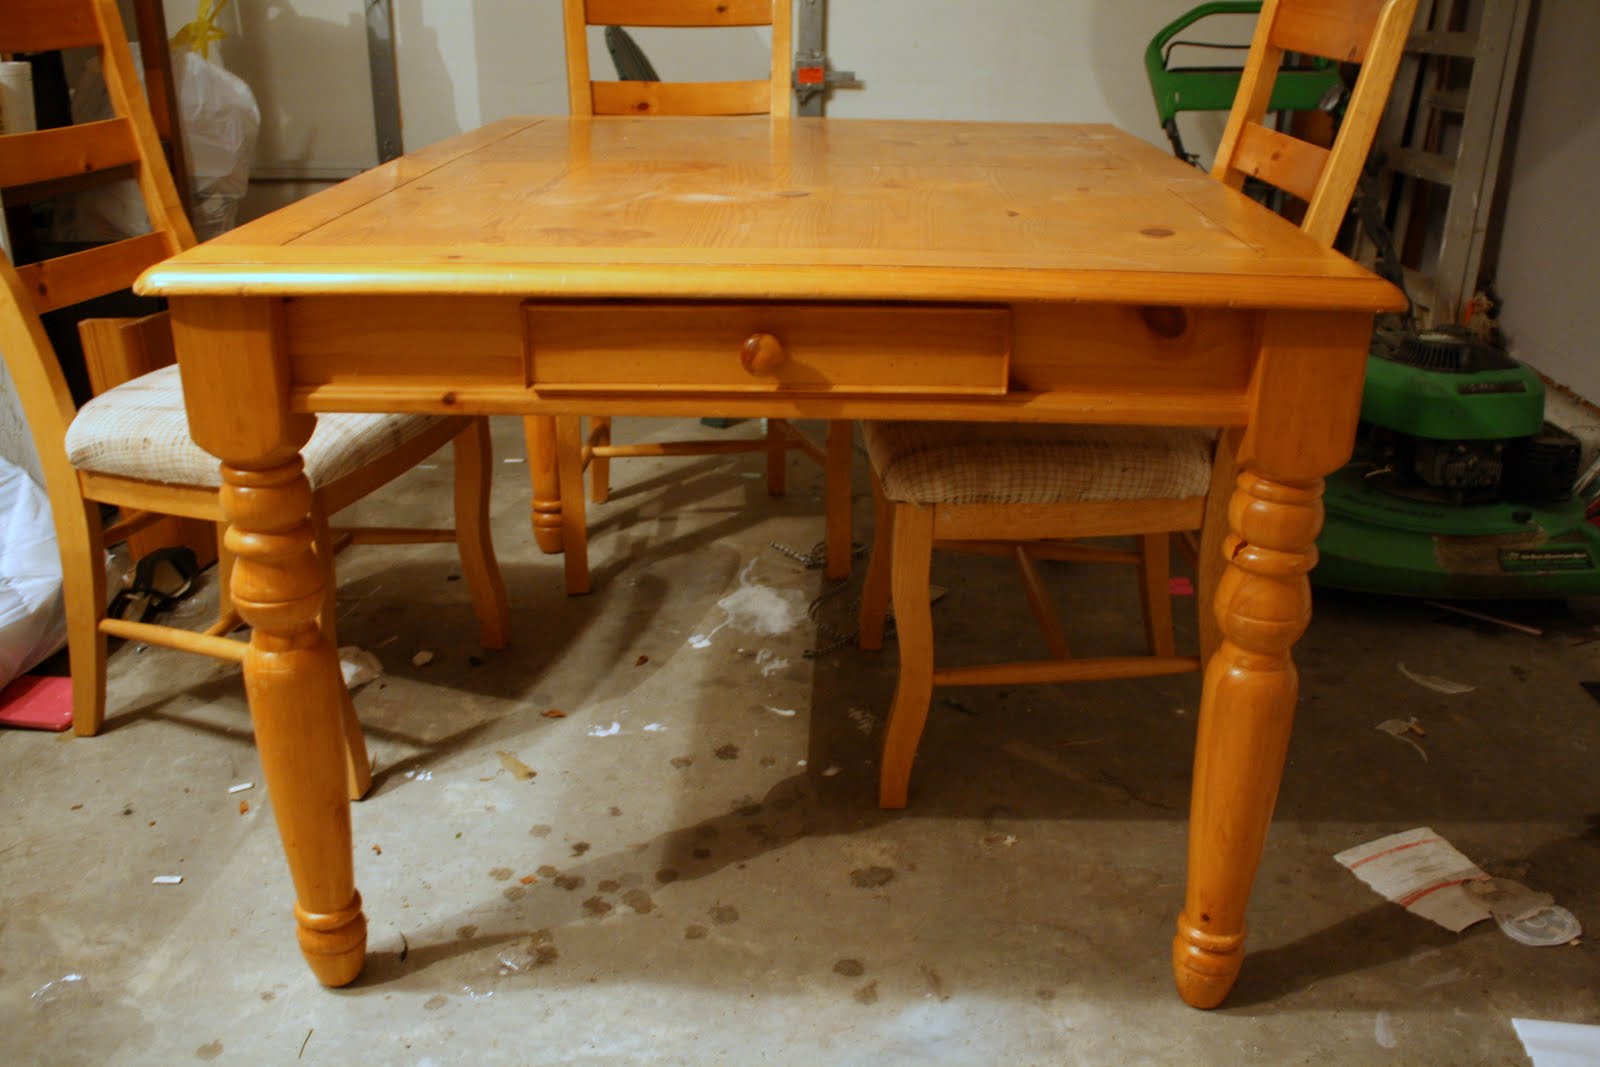 Refinishing The Dining Room Table, Honey Oak Dining Room Table And Chairs